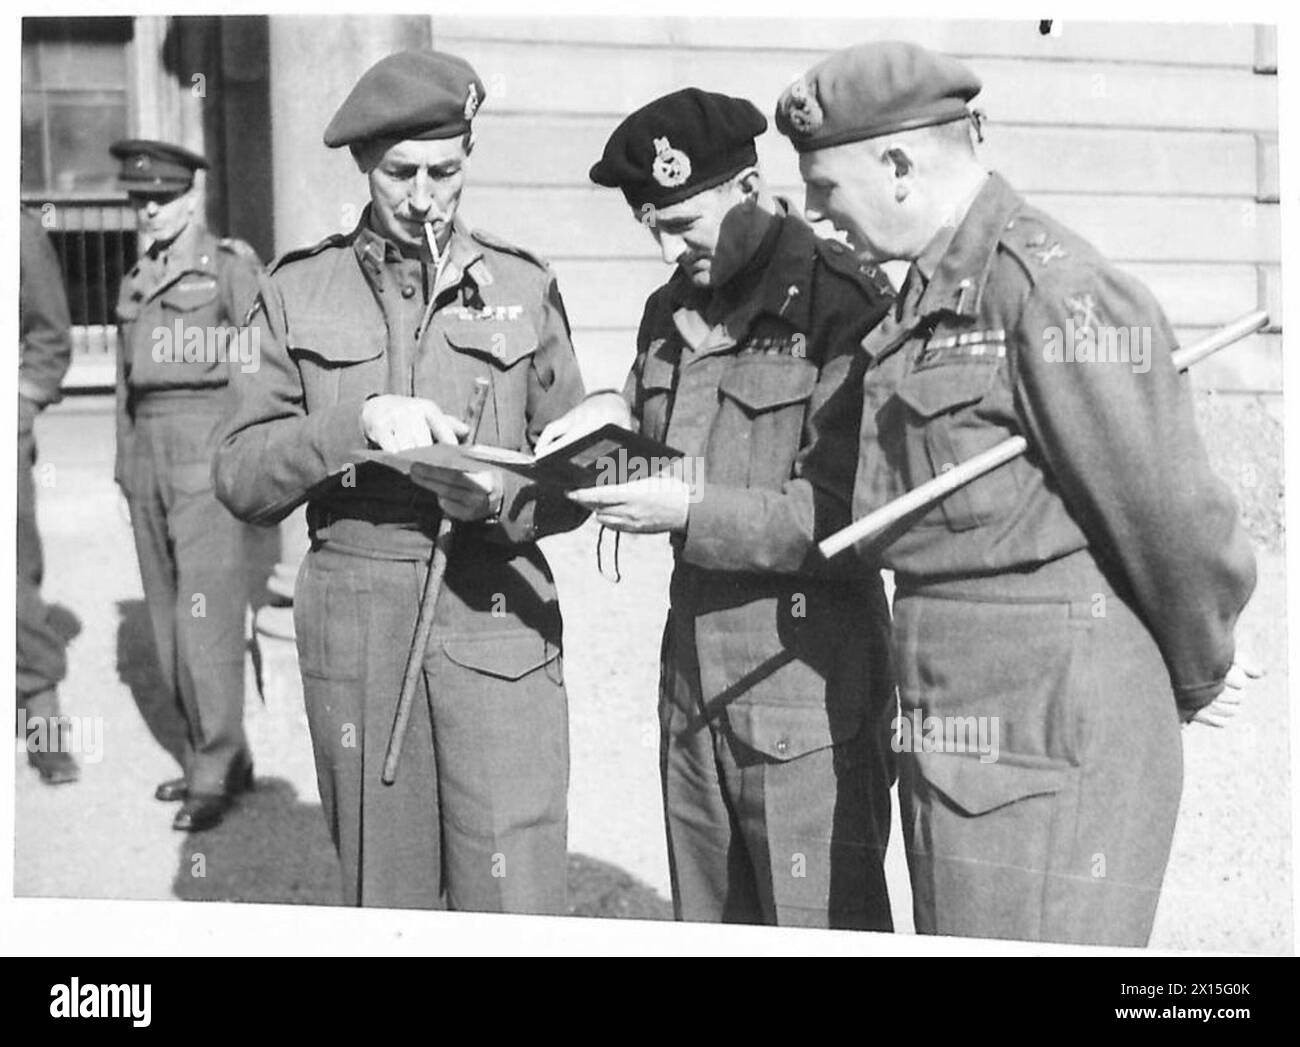 21ST ARMY GROUP OFFICERS - Major General M.G. Dennis M.G.R.A. Major General G.W. Richards M.G.R.A.C. Major General J.D. Inglis C.E British Army Stock Photo